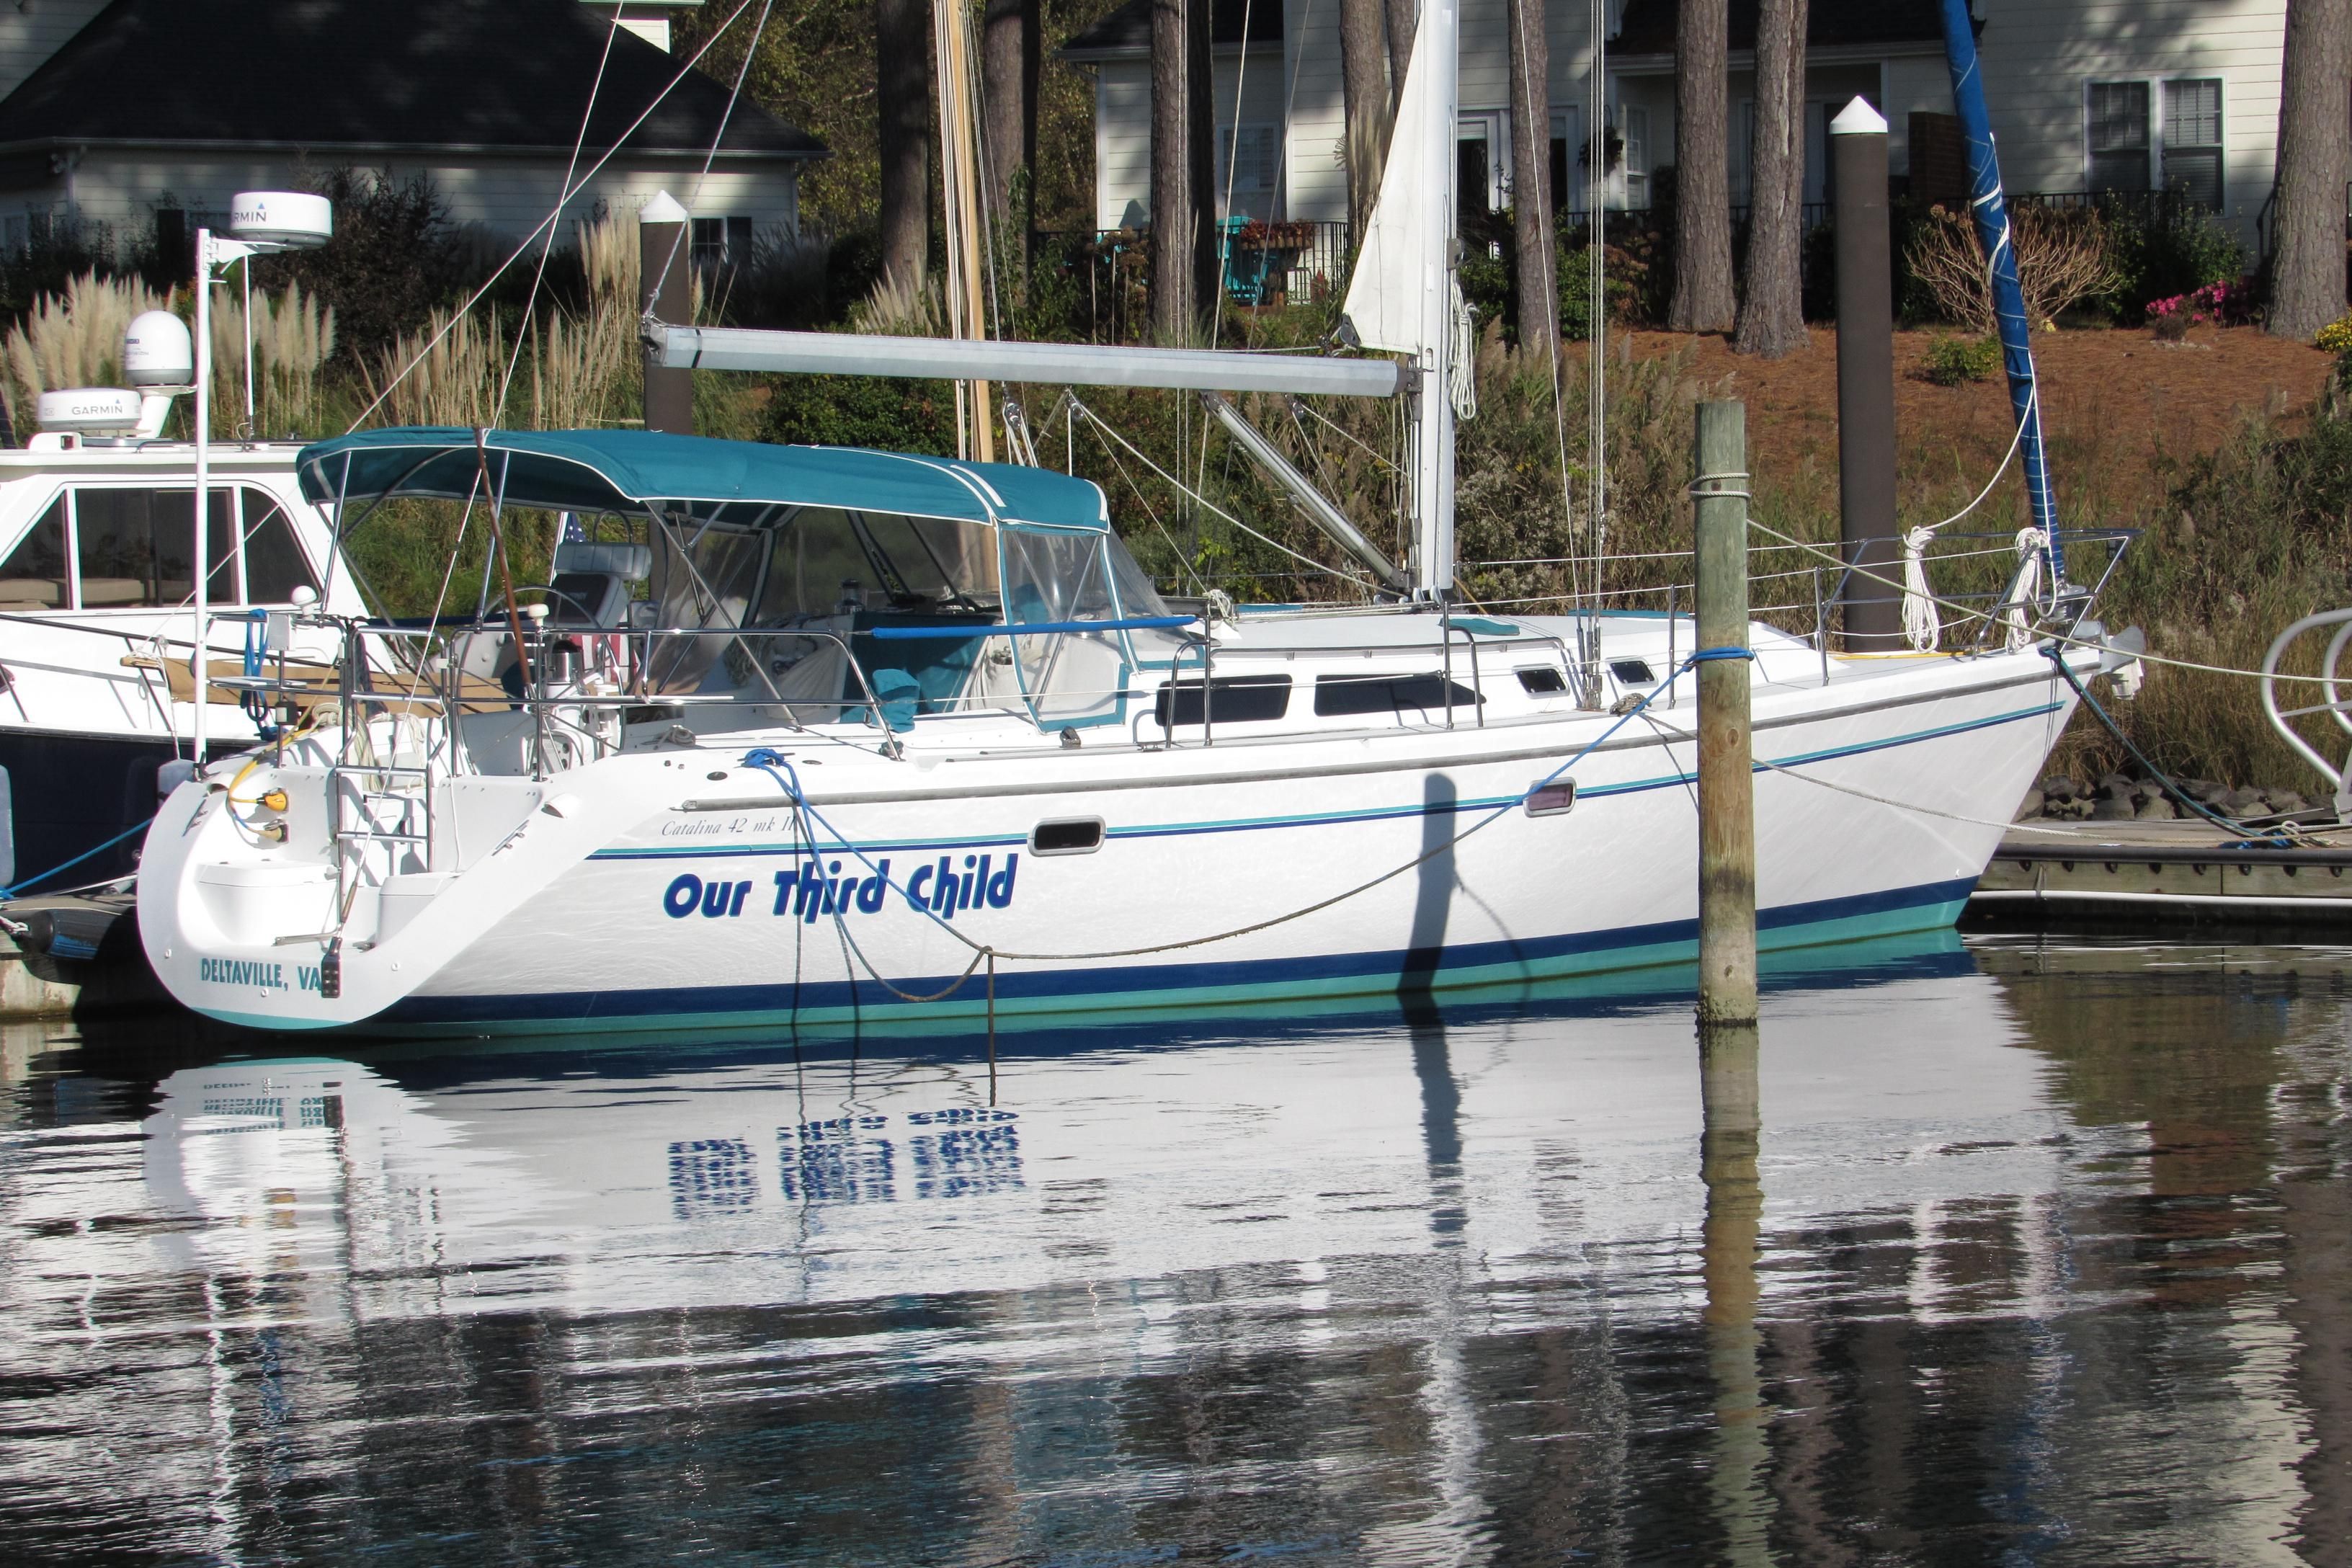 42 foot catalina sailboat for sale